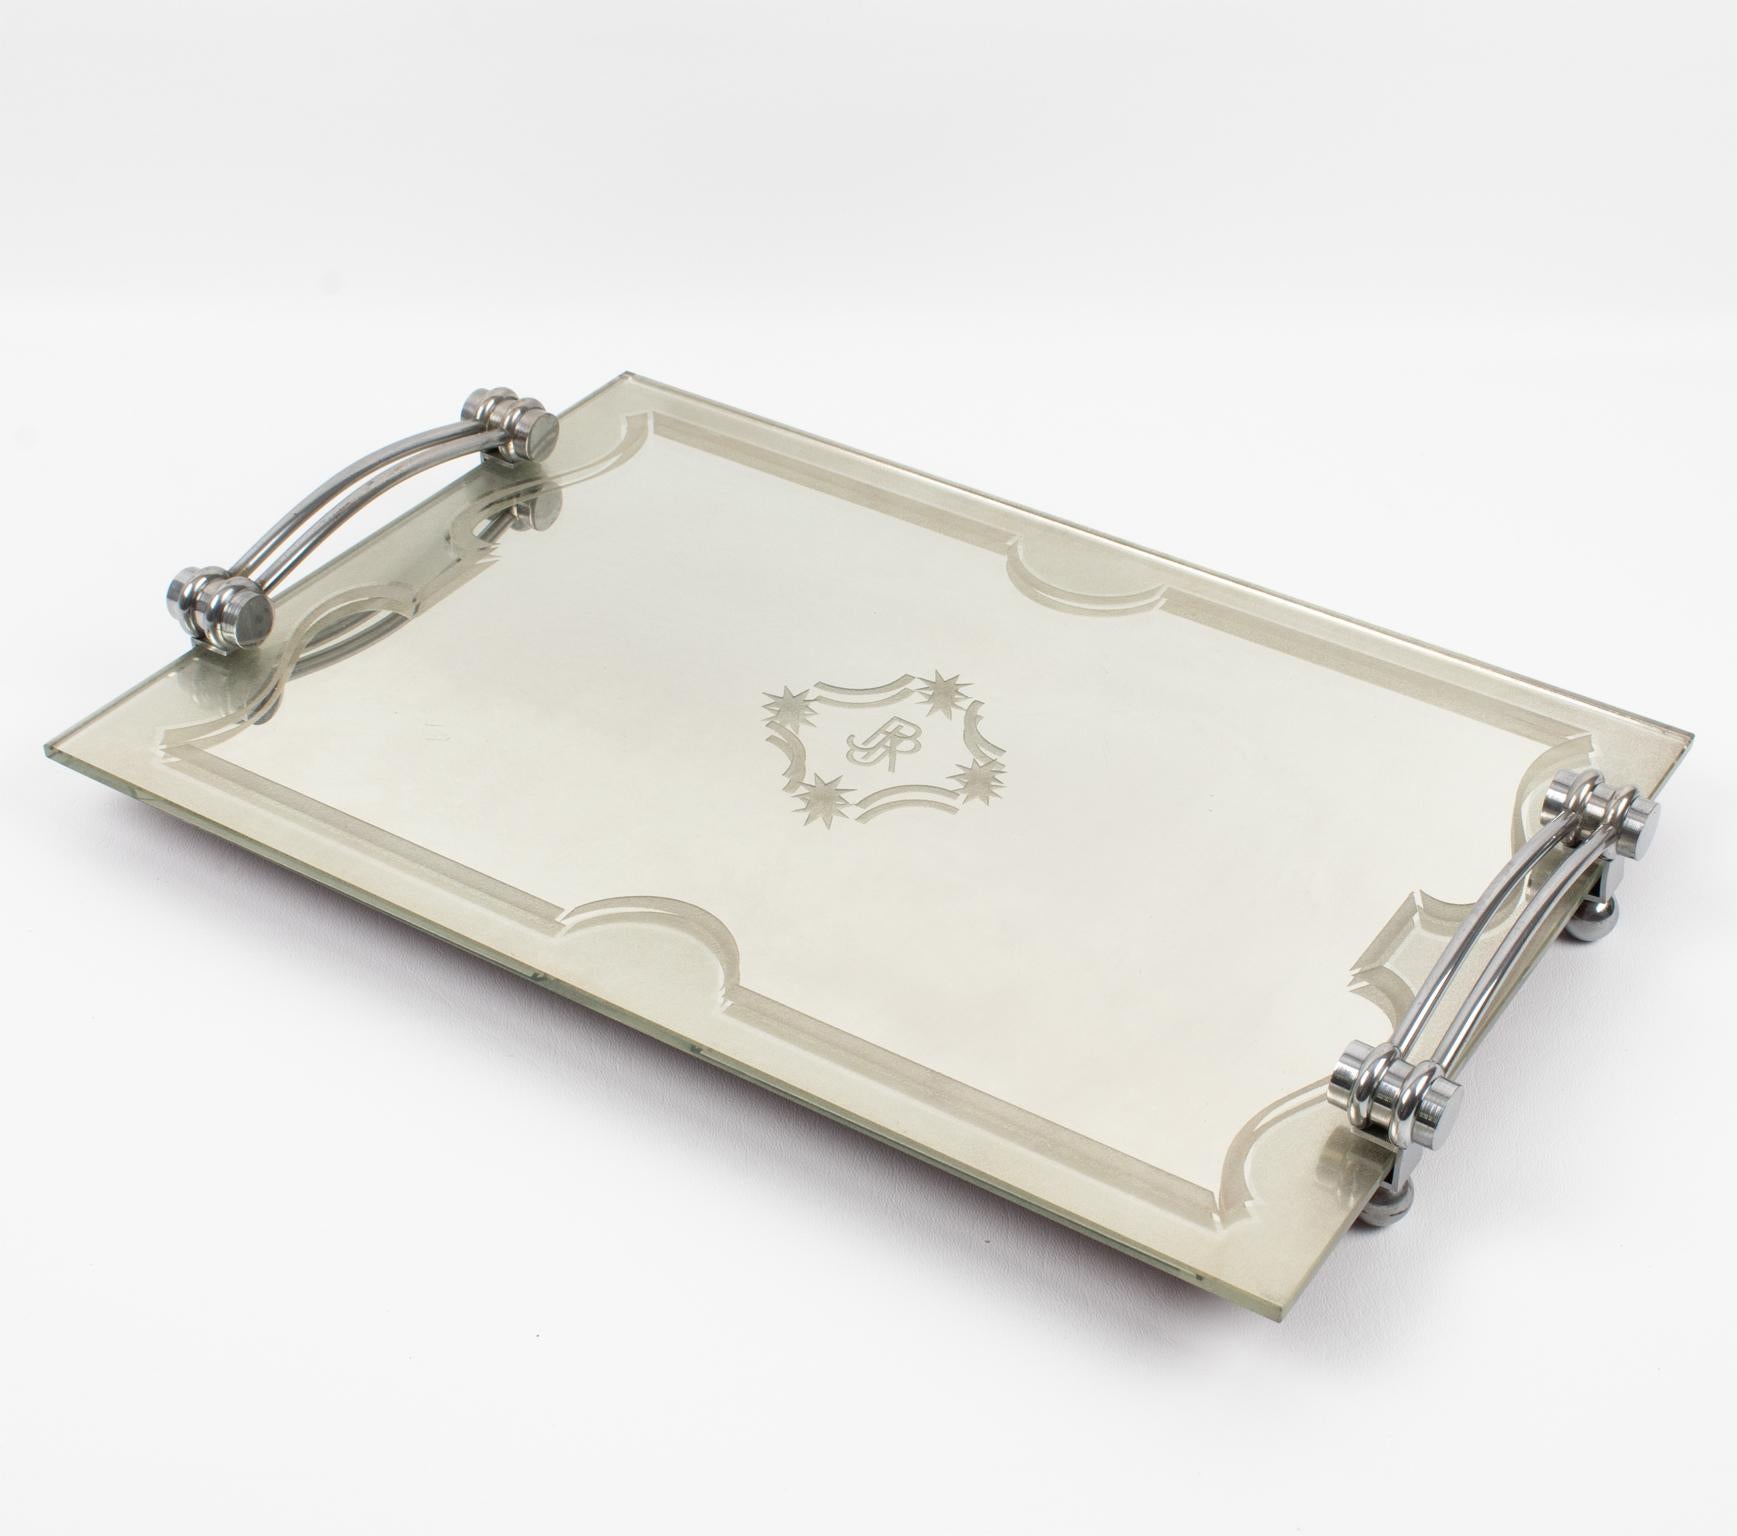 This lovely French Art Deco chromed metal and mirror tray features a thick mirrored glass slab with a frosted geometric design all around and a monogram engraved in the center reading 